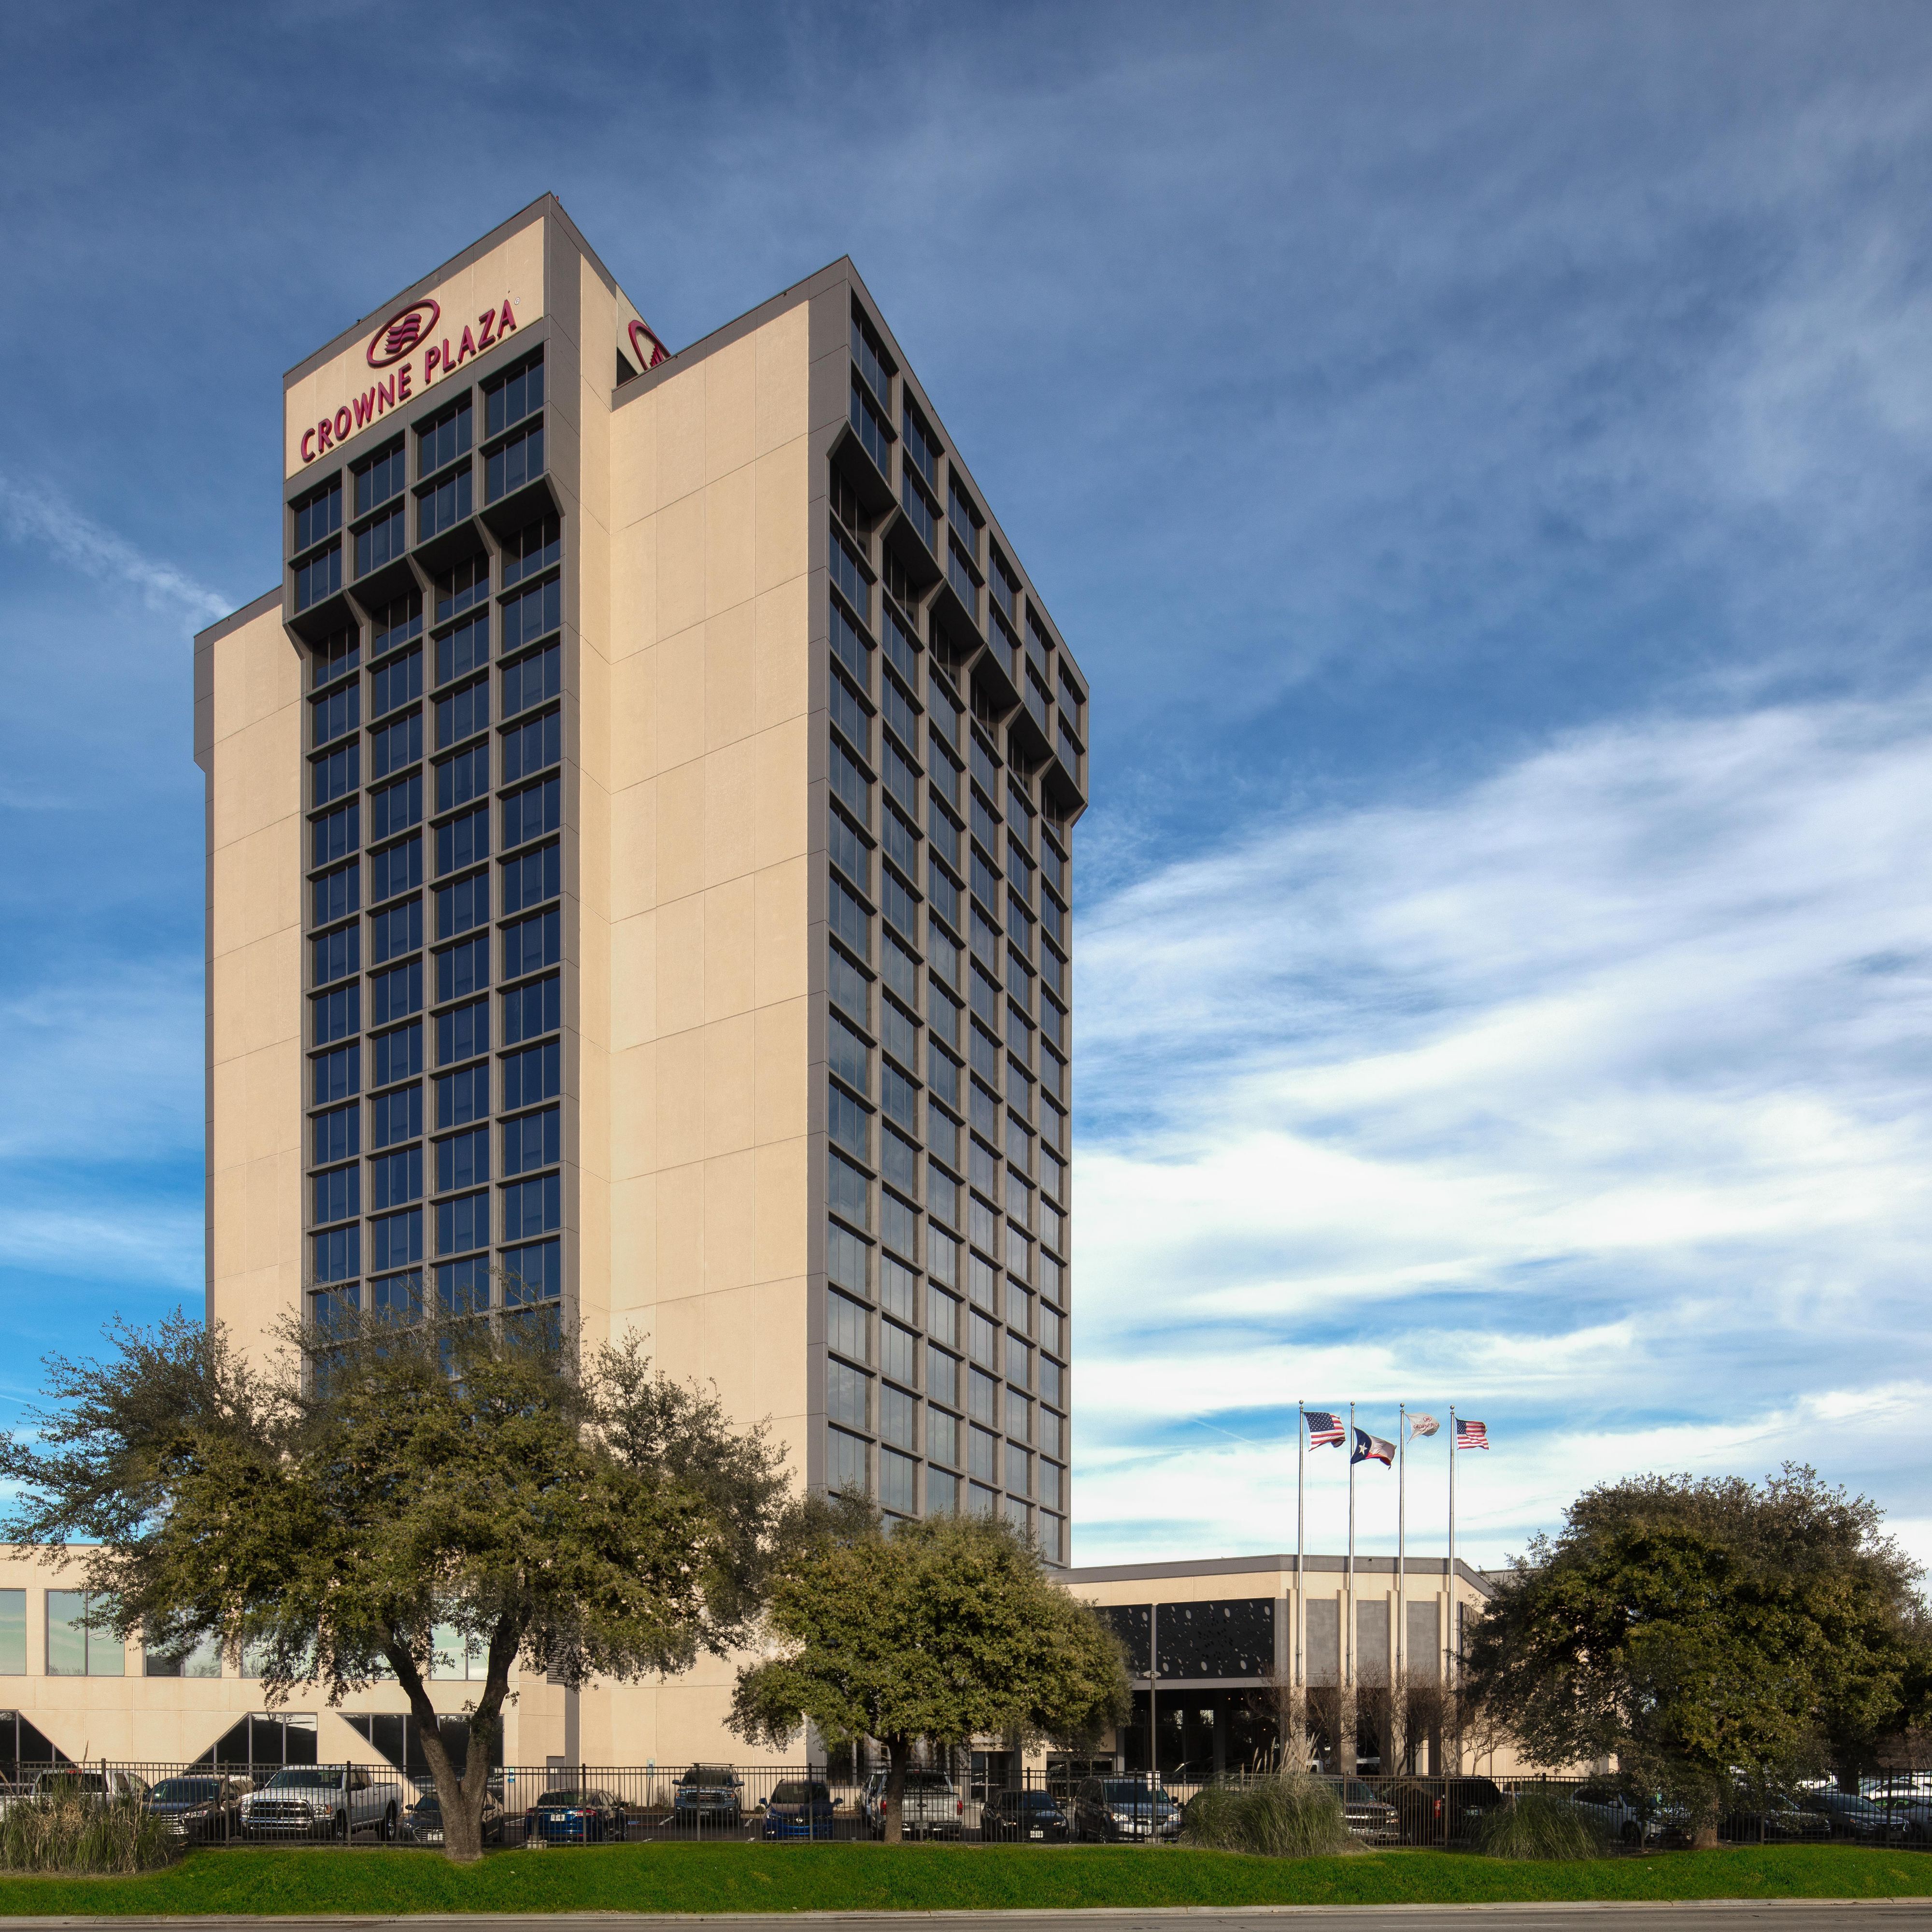 Our Dallas hotel has been been given a brand new look!